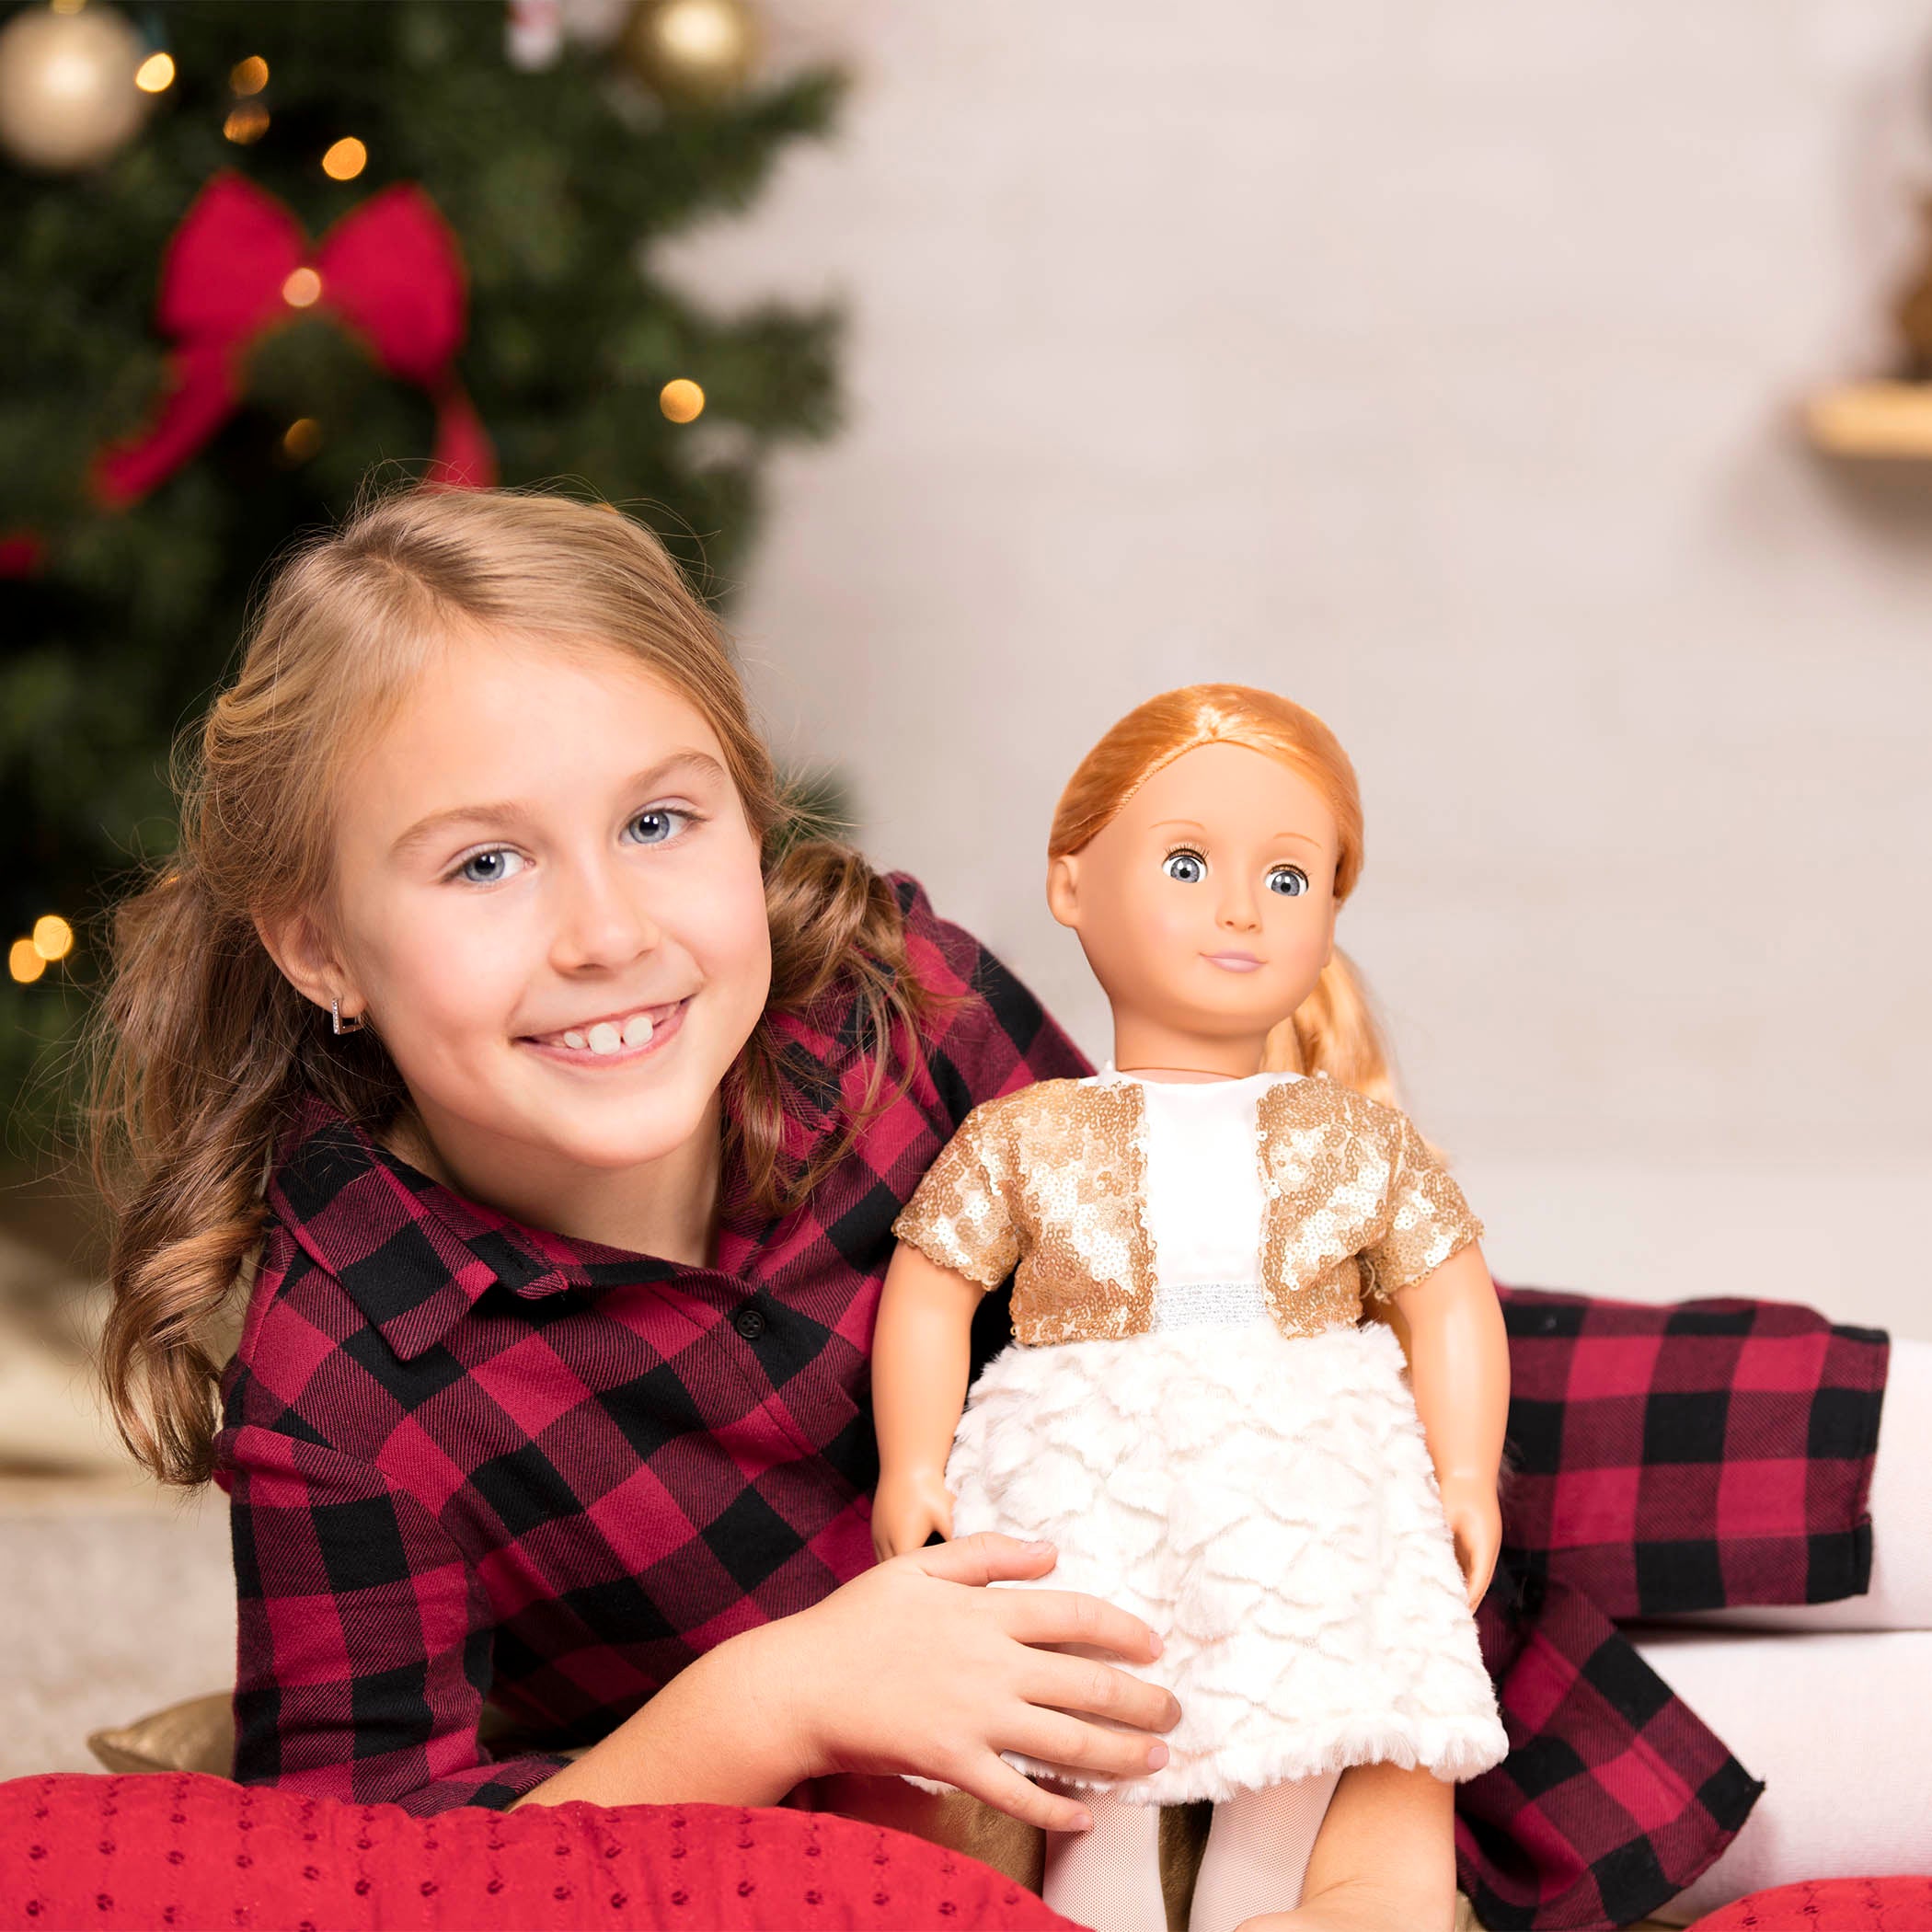 18-inch holiday doll with strawberry-blonde hair and gray eyes